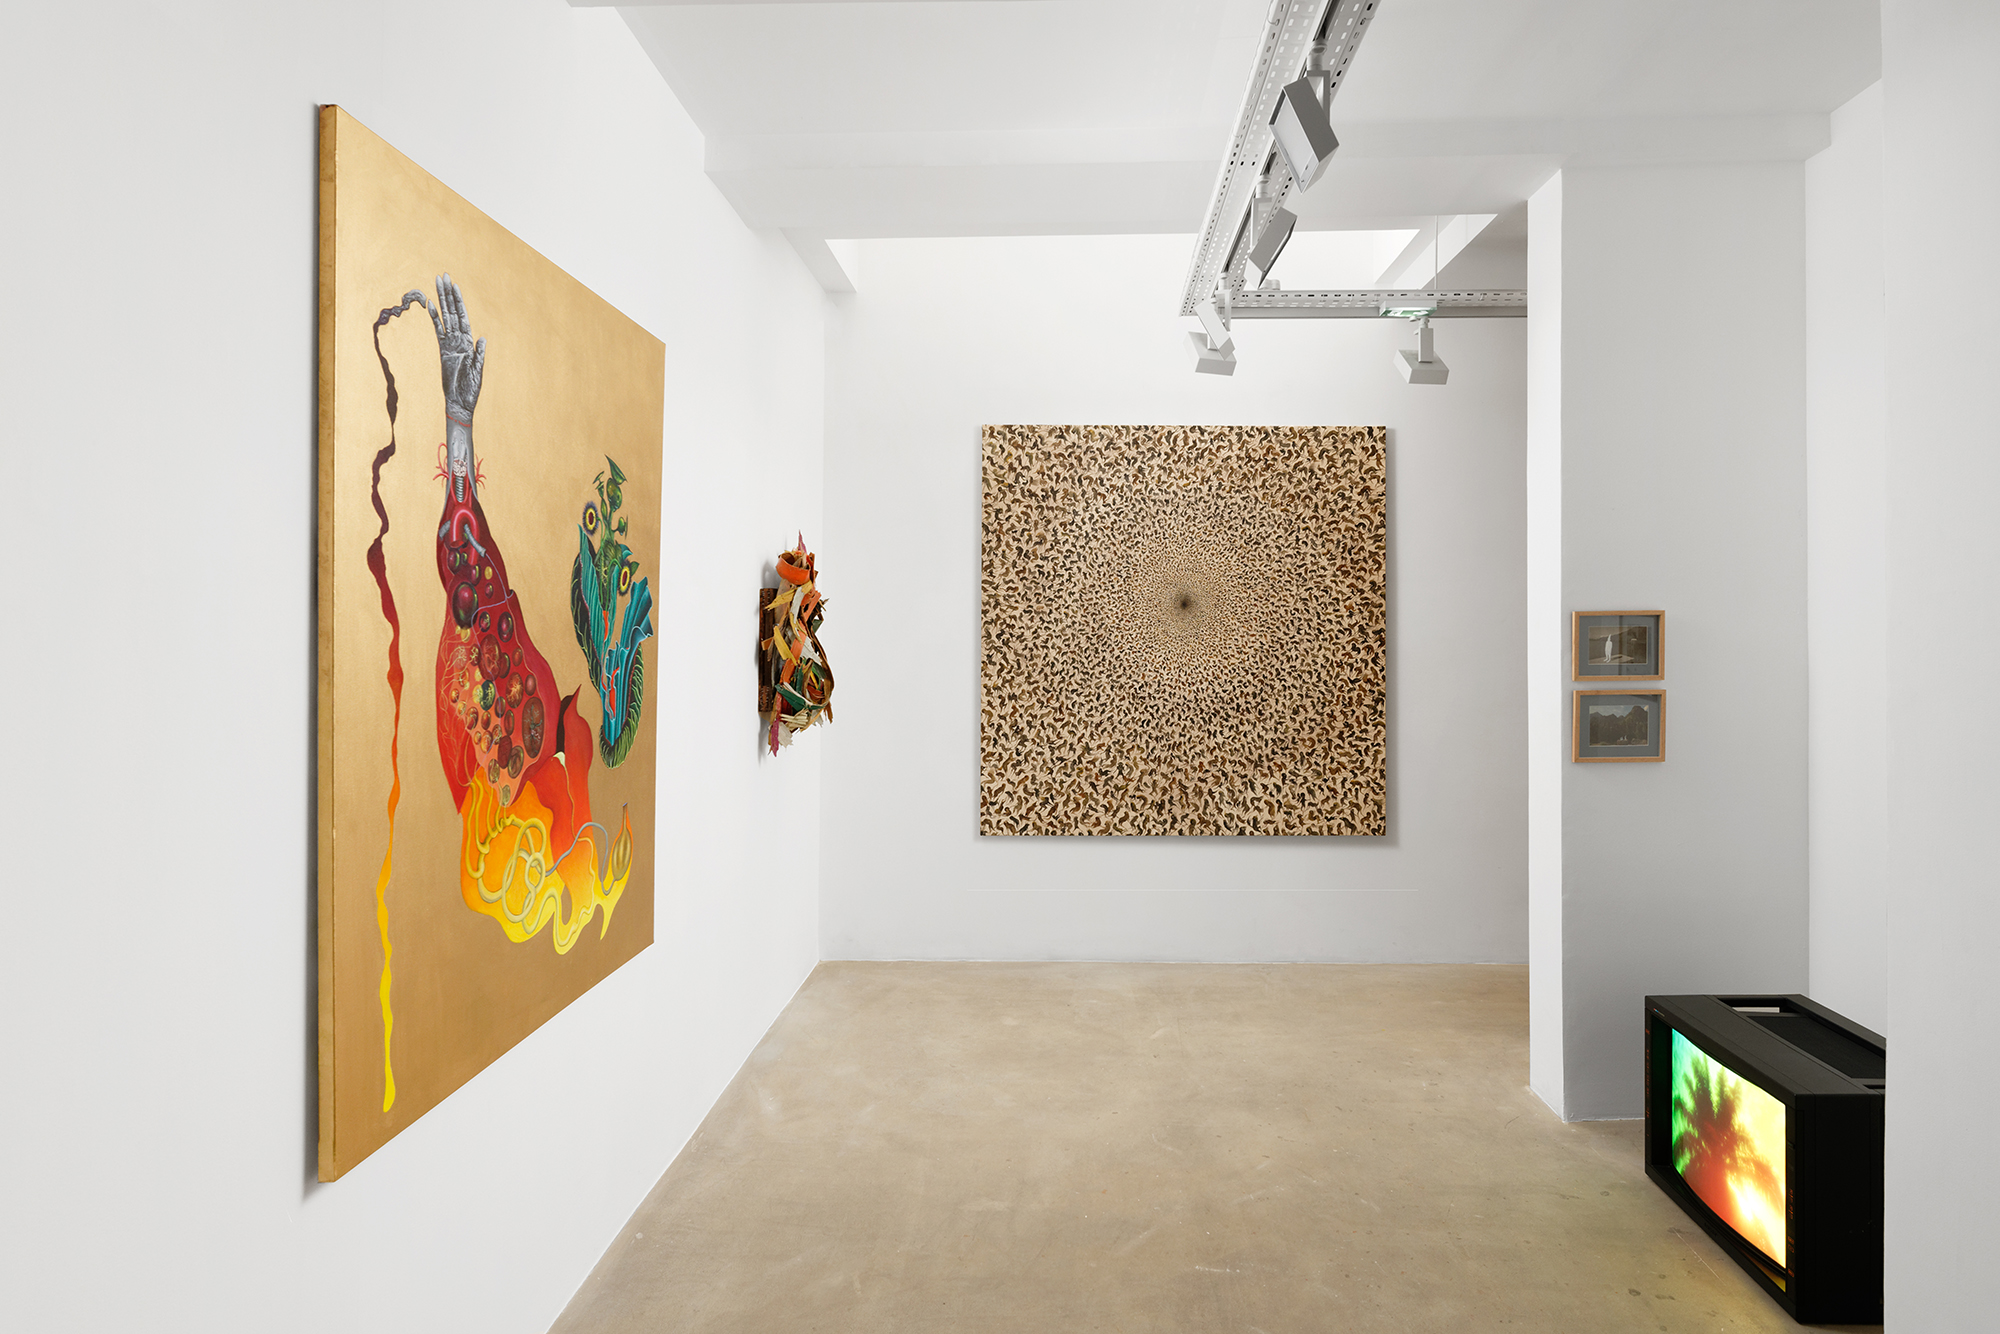 Installation image for Always the Sun, at Galerie Georges-Philippe & Nathalie Vallois